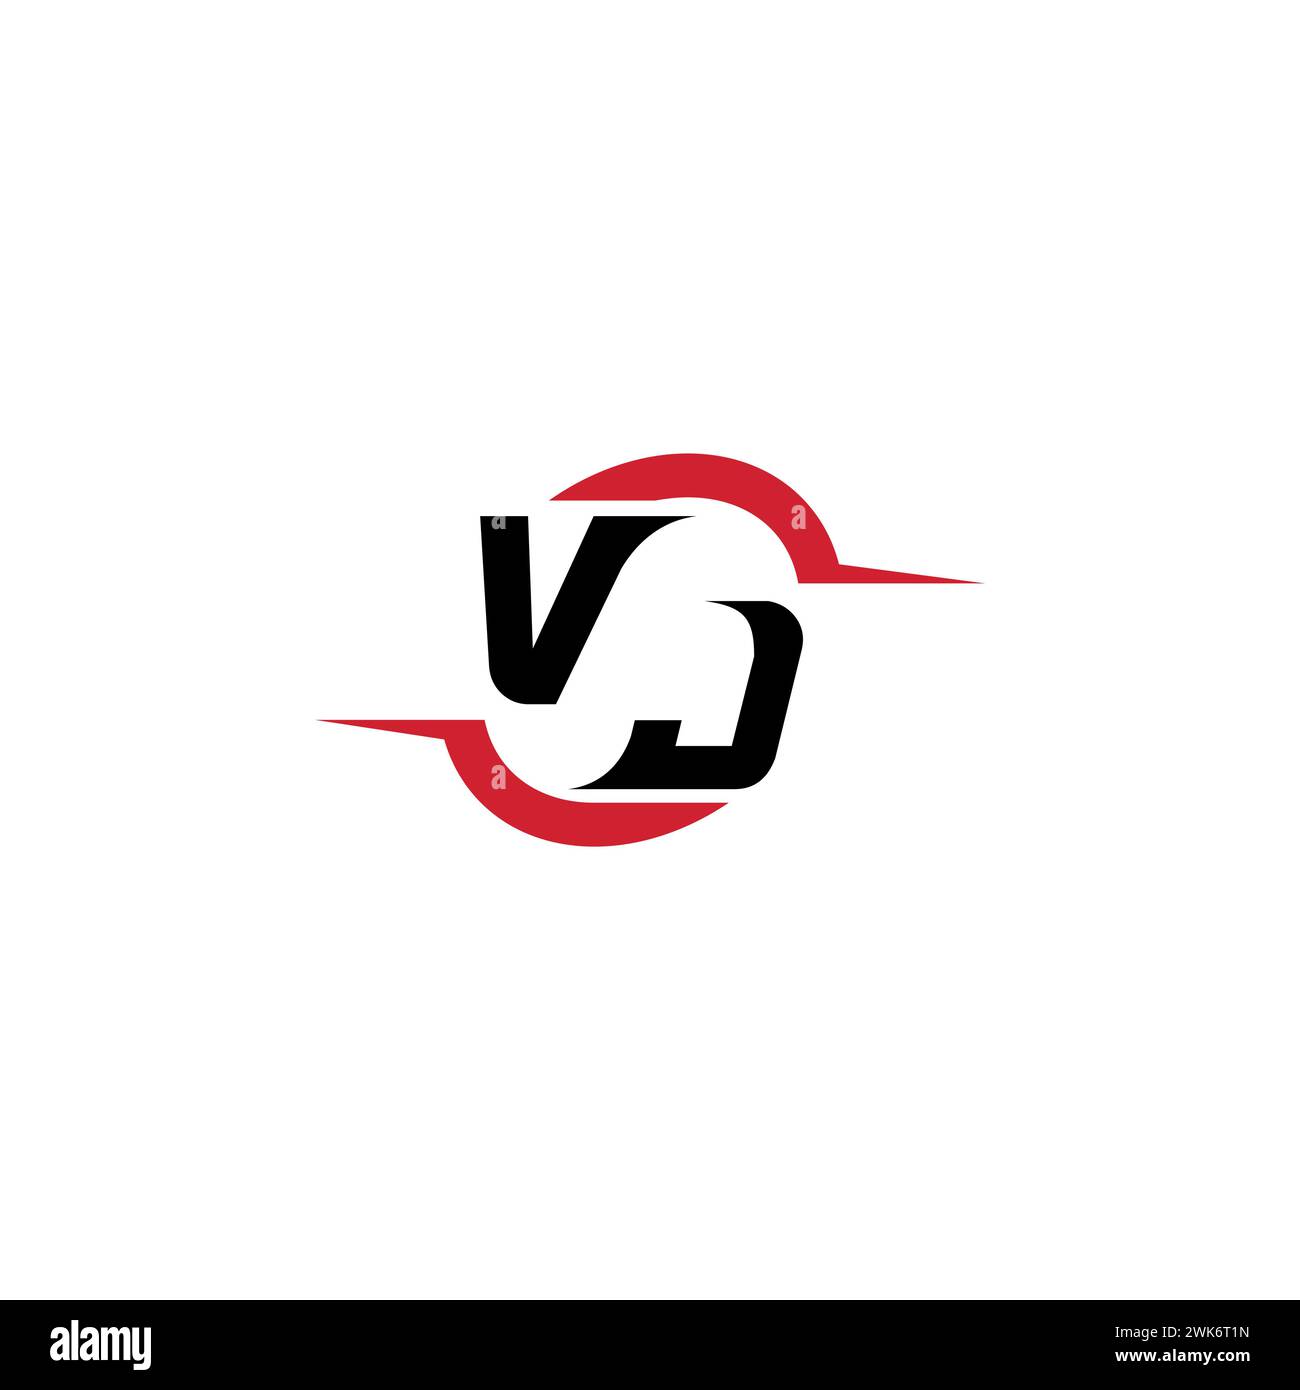 VJ initial logo cool and stylish concept for esport or gaming logo as your inspirational Stock Vector